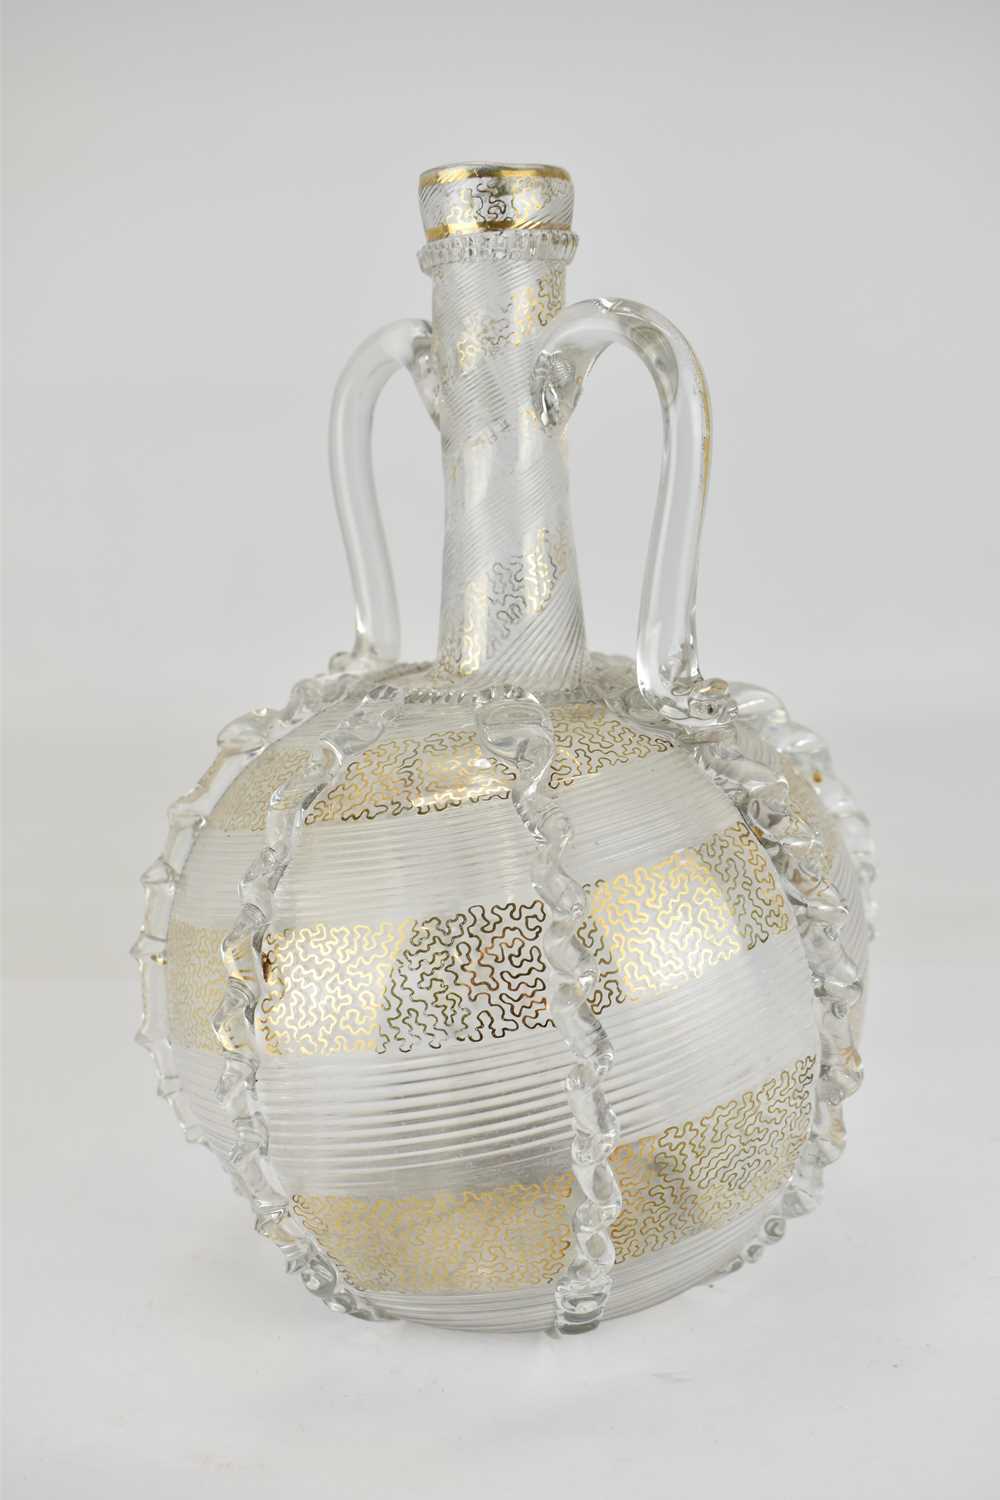 A 19th century Dutch revival bottle vase of globe form, with decorative external rigger and a - Image 3 of 4